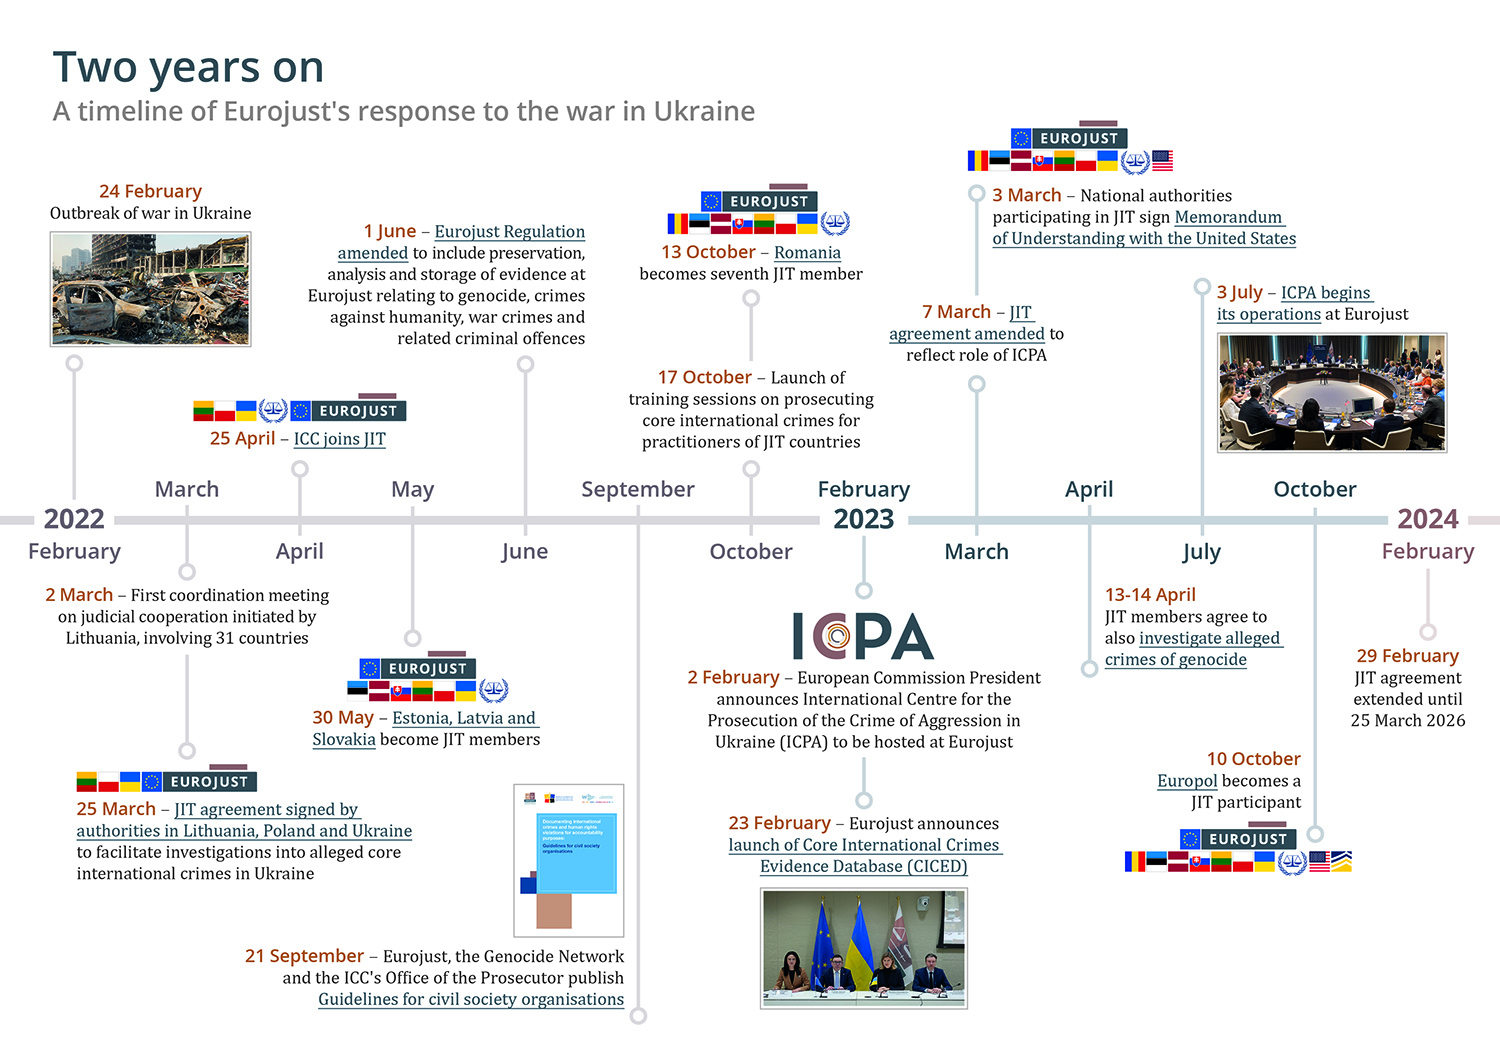 A timeline of Eurojust's response to the war in Ukraine